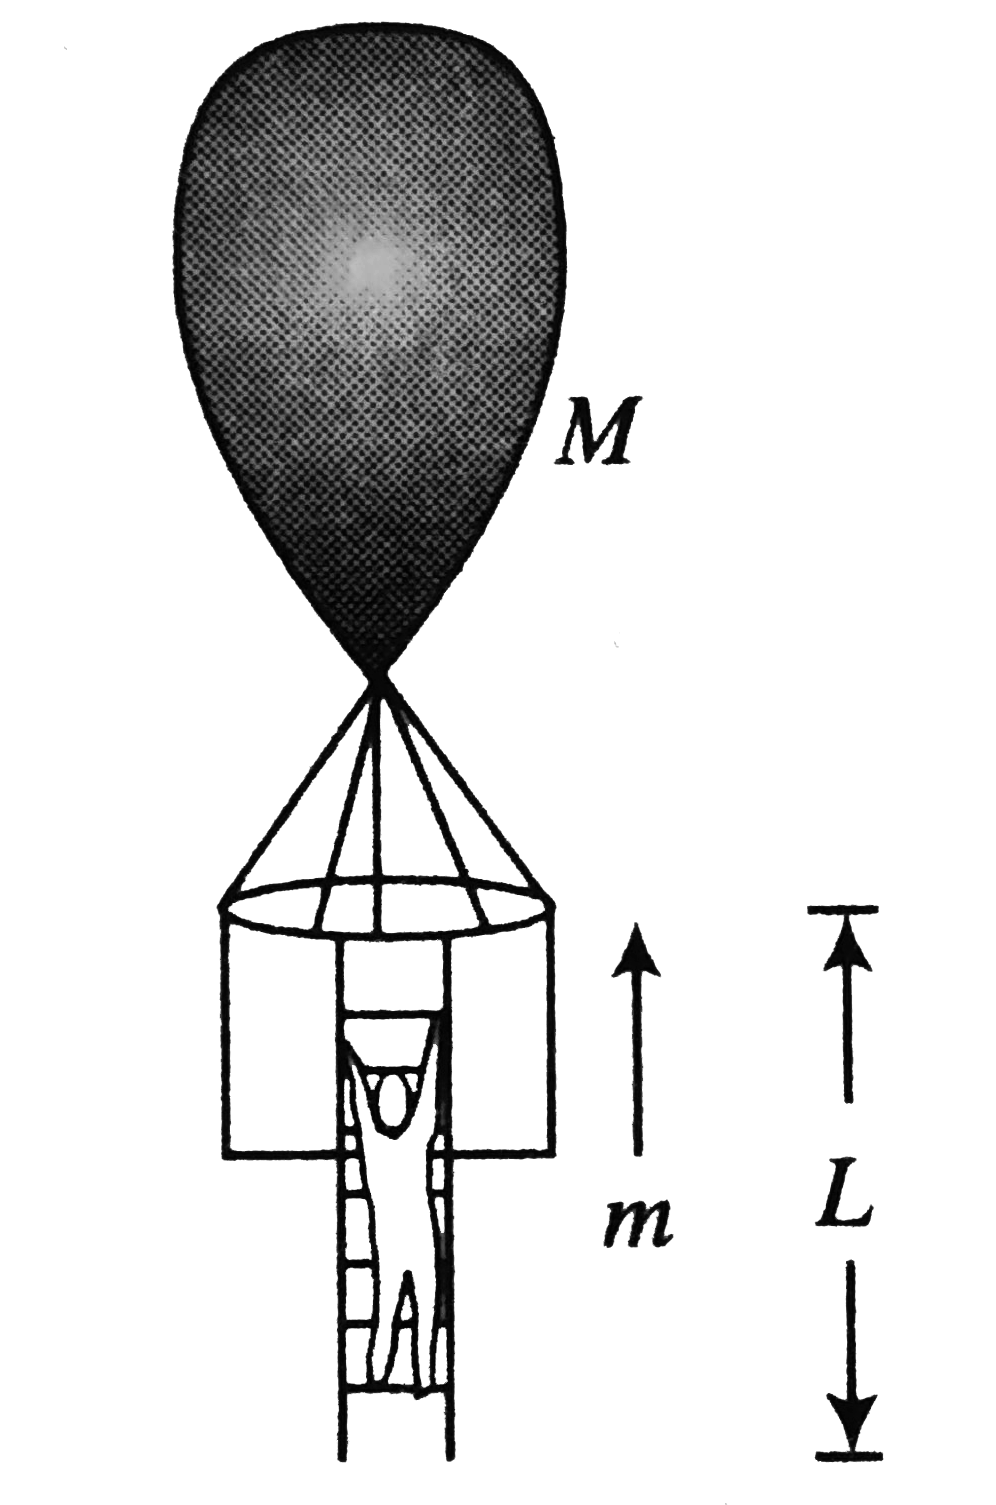 A rope ladder of length L is attached to a balloon of mass M. As the man of mass m climbs the ladder into the balloon basket, the balloon comes down by a vertical distance s. Then the increase in potential energy of man divided by the increase in potential energy of balloon is